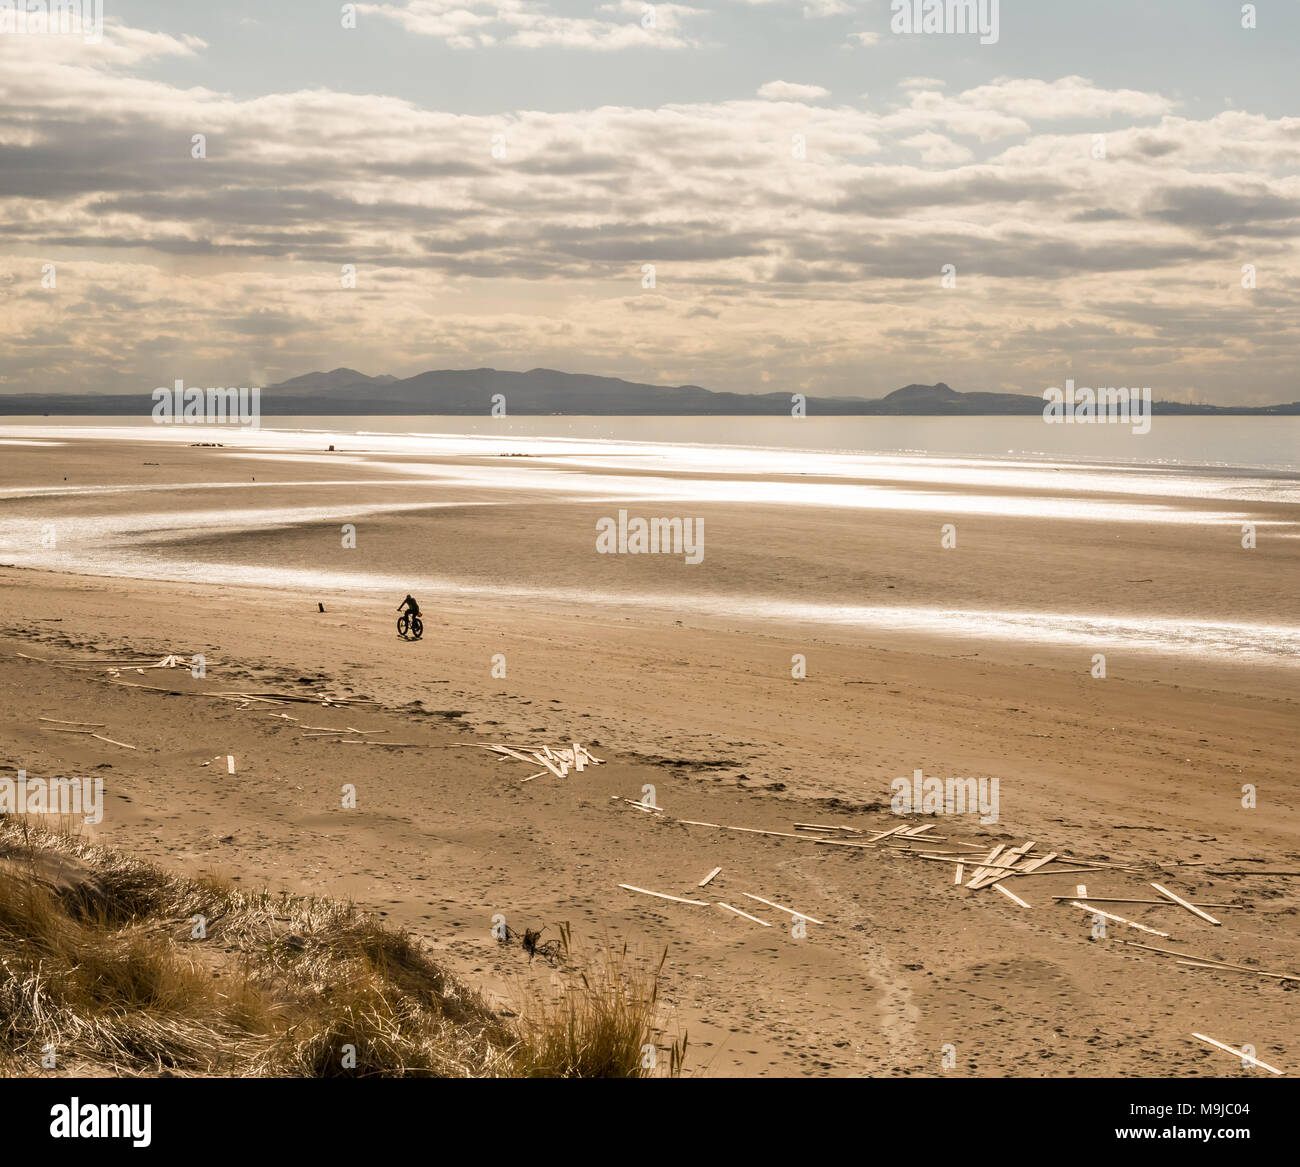 Aberlady Nature Reserve, Aberlady, East Lothian, Scotland, United Kingdom, 26th March 2018. Planks of timber lie washed up after spilling from a cargo vessel ‘Frisian Lady’ which lost the timber bundles during severe weather on 2nd March during stormy weather.  A man rides a bicycle along the beach Stock Photo